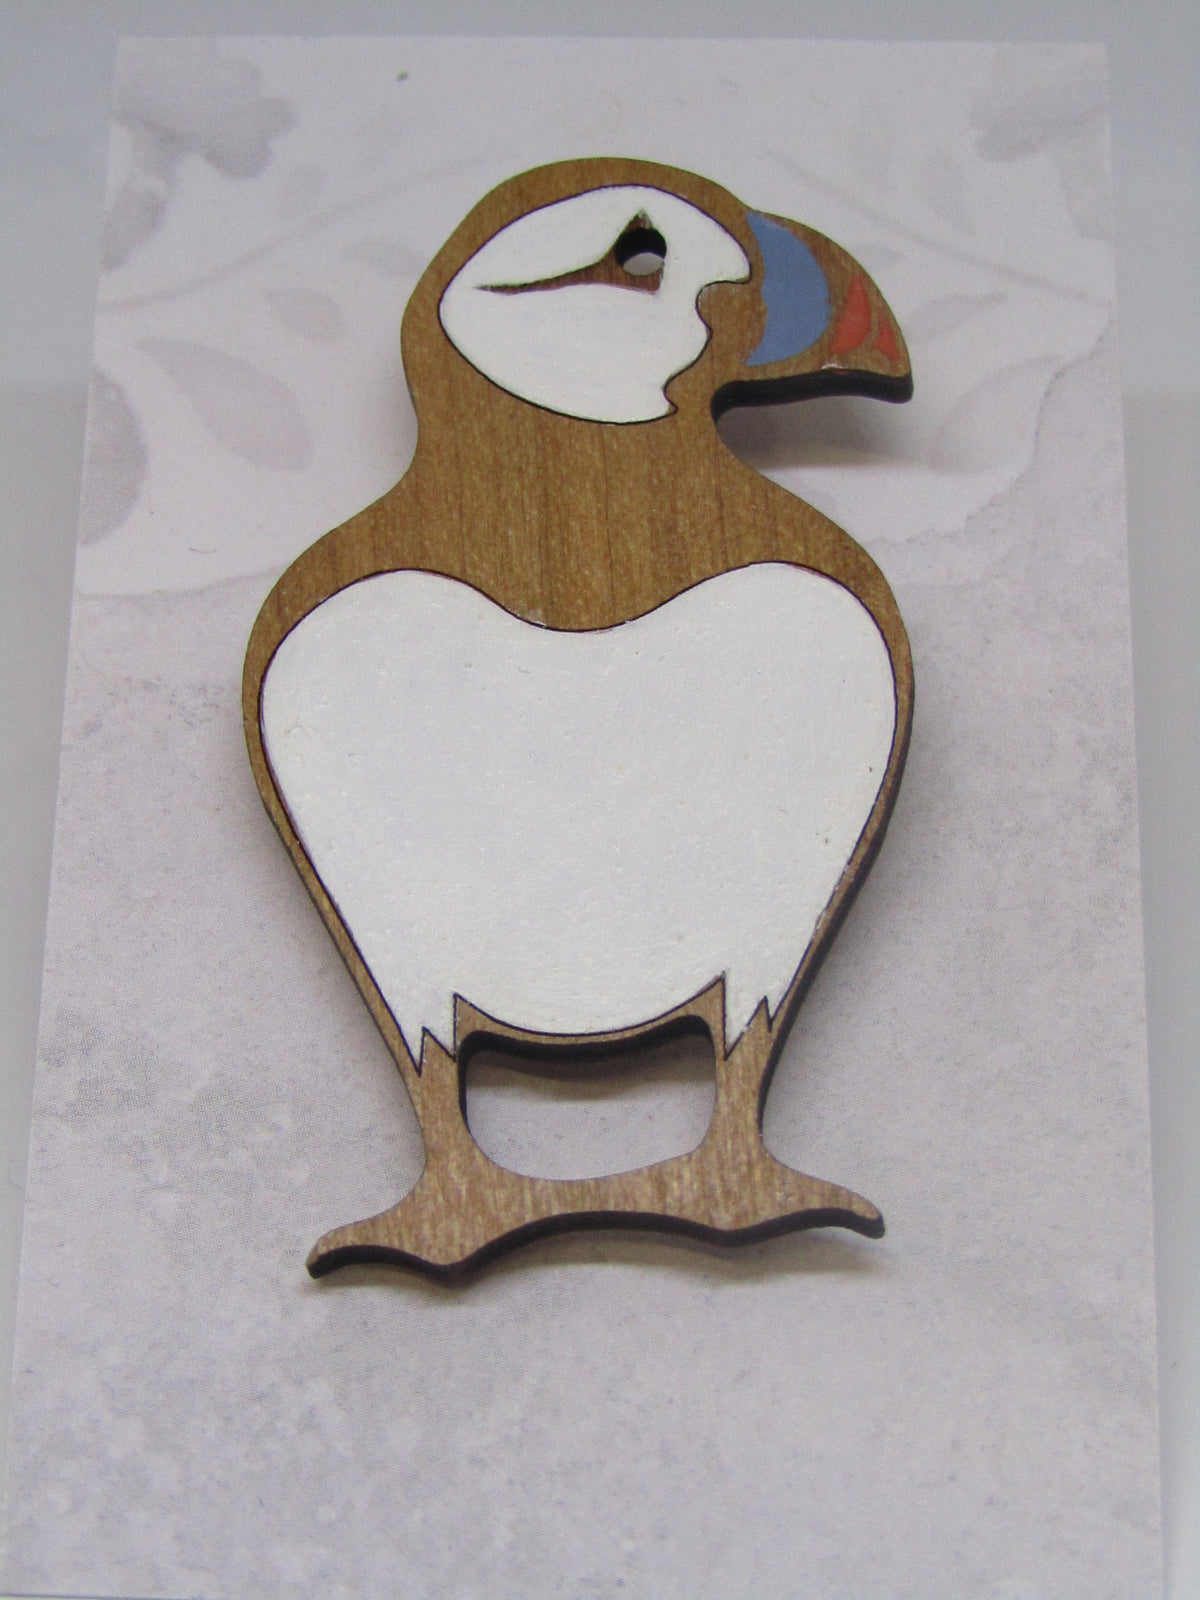 Puffin Brooch by Sarah Kelly